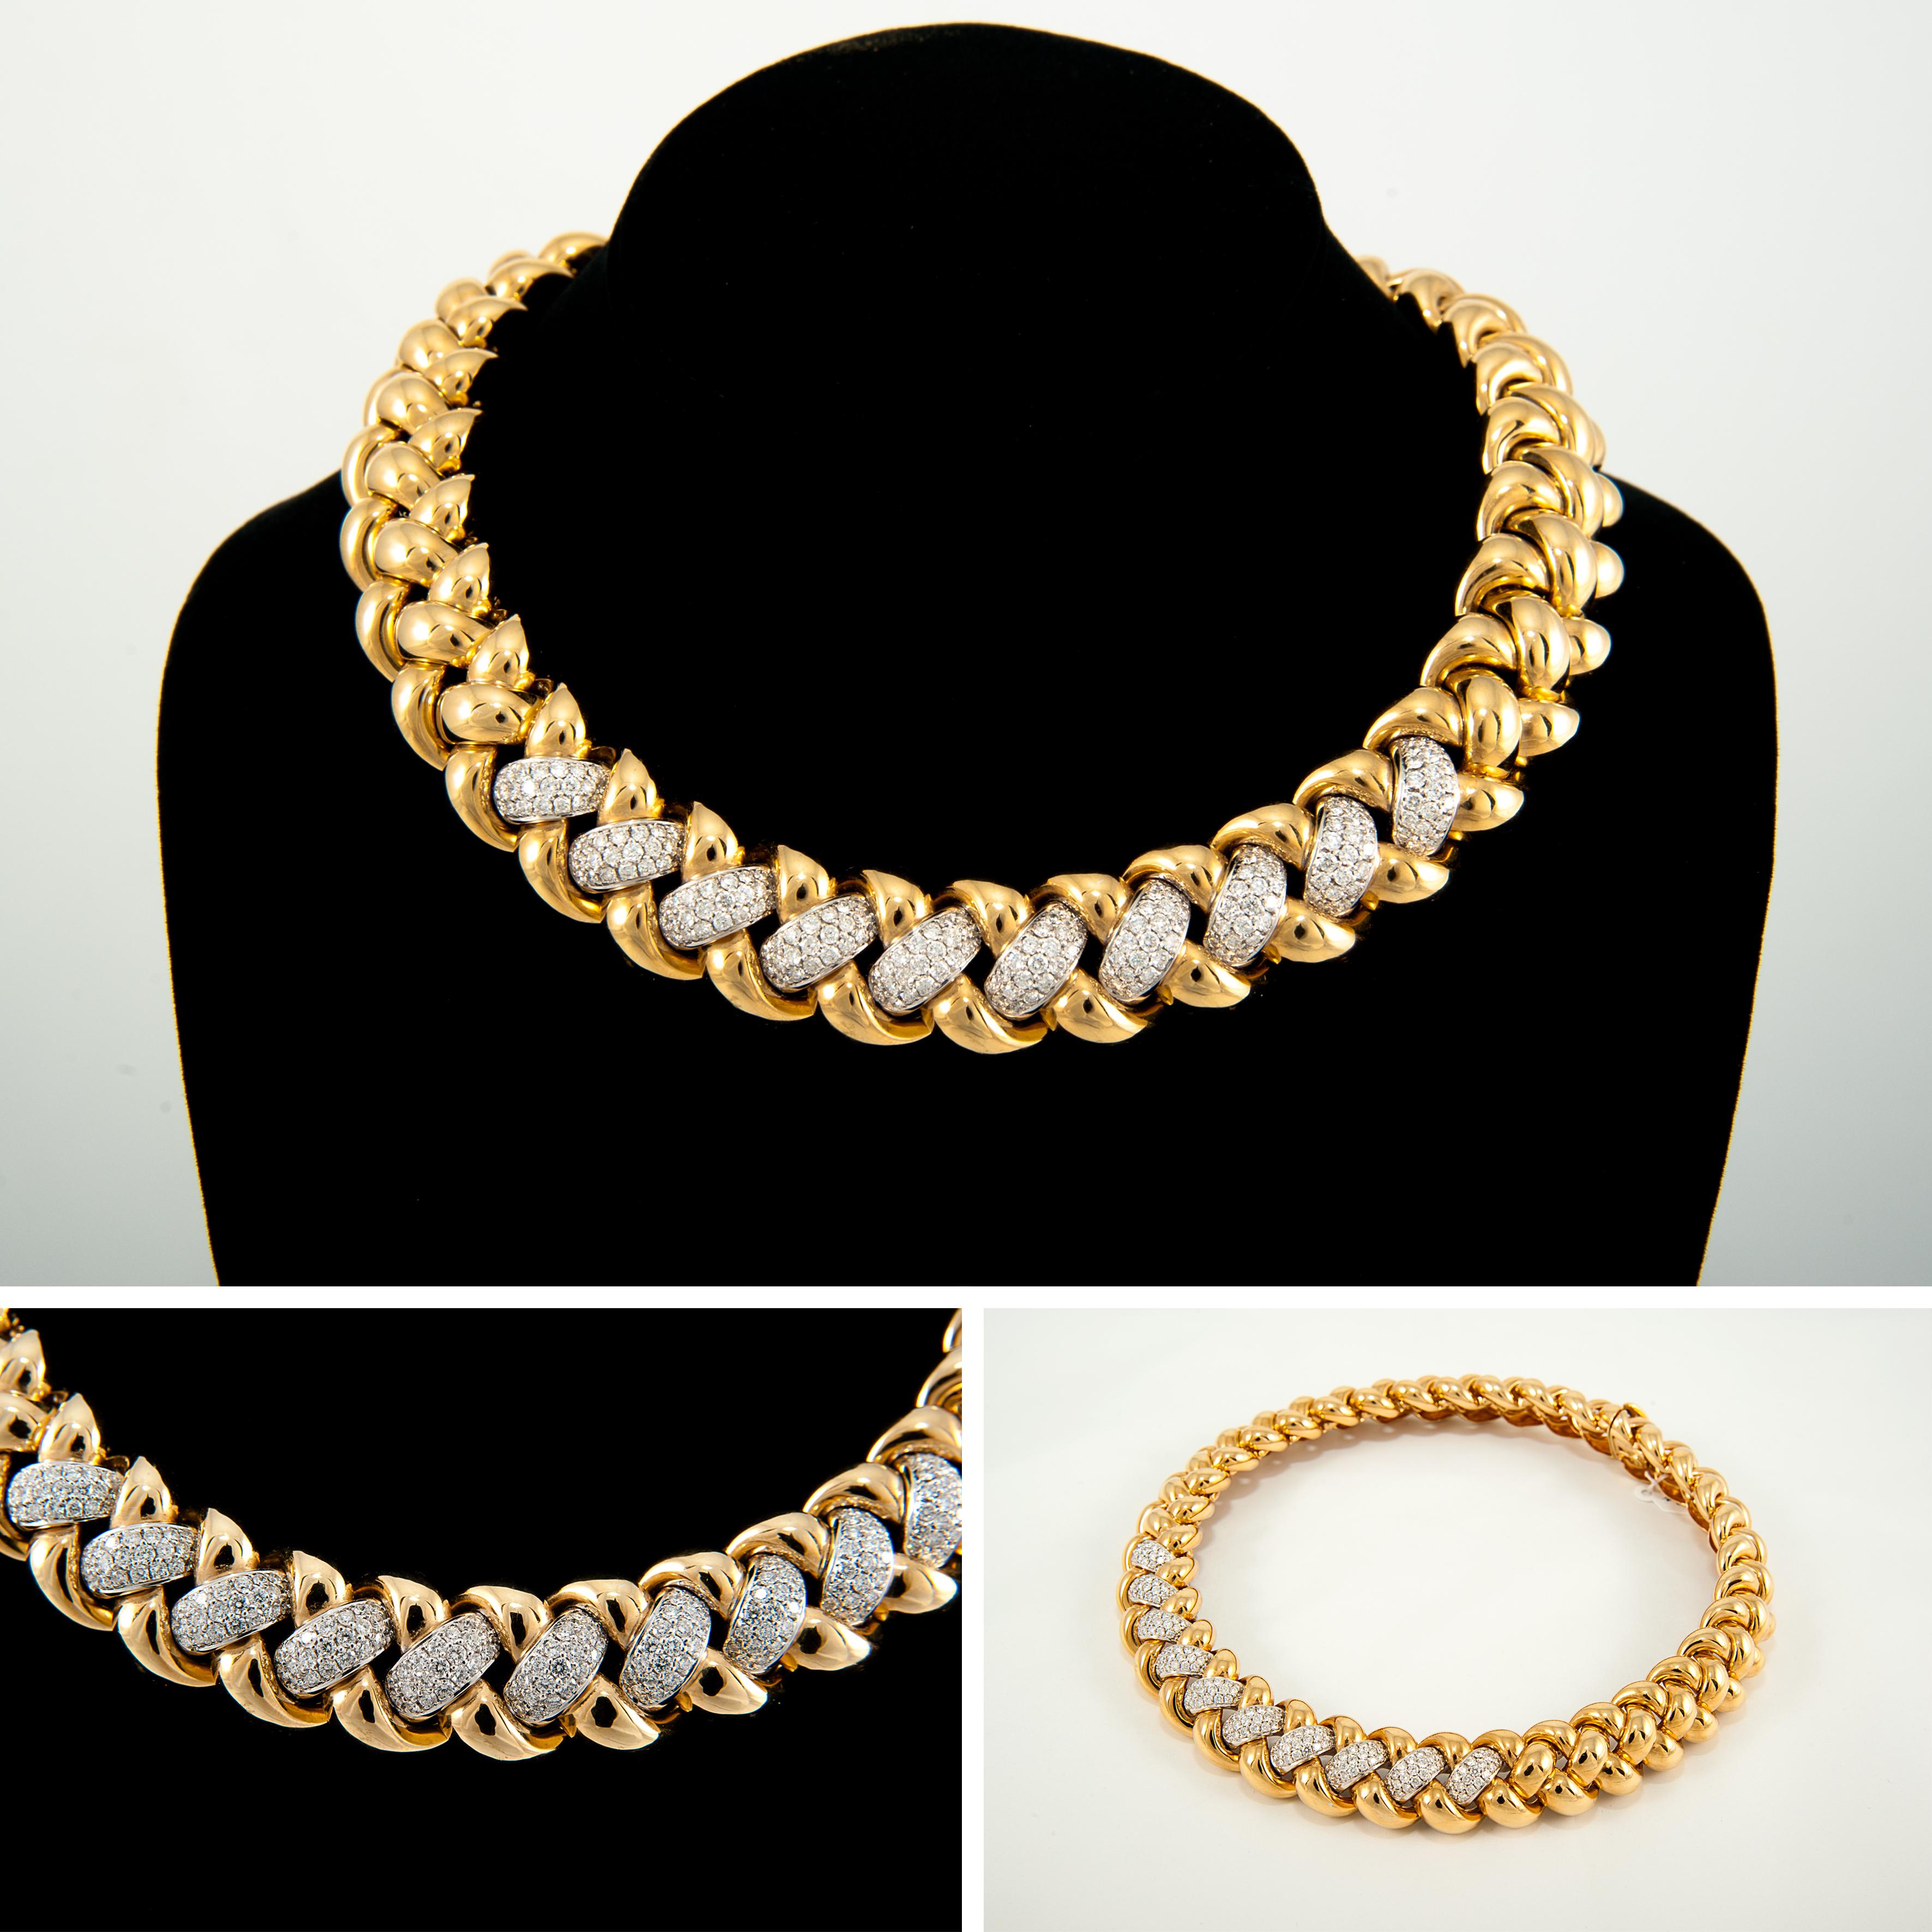 Round Cut Vintage Retro Style 11 Carat Diamond and 18 Karat Yellow Gold Necklace 209.43gr For Sale